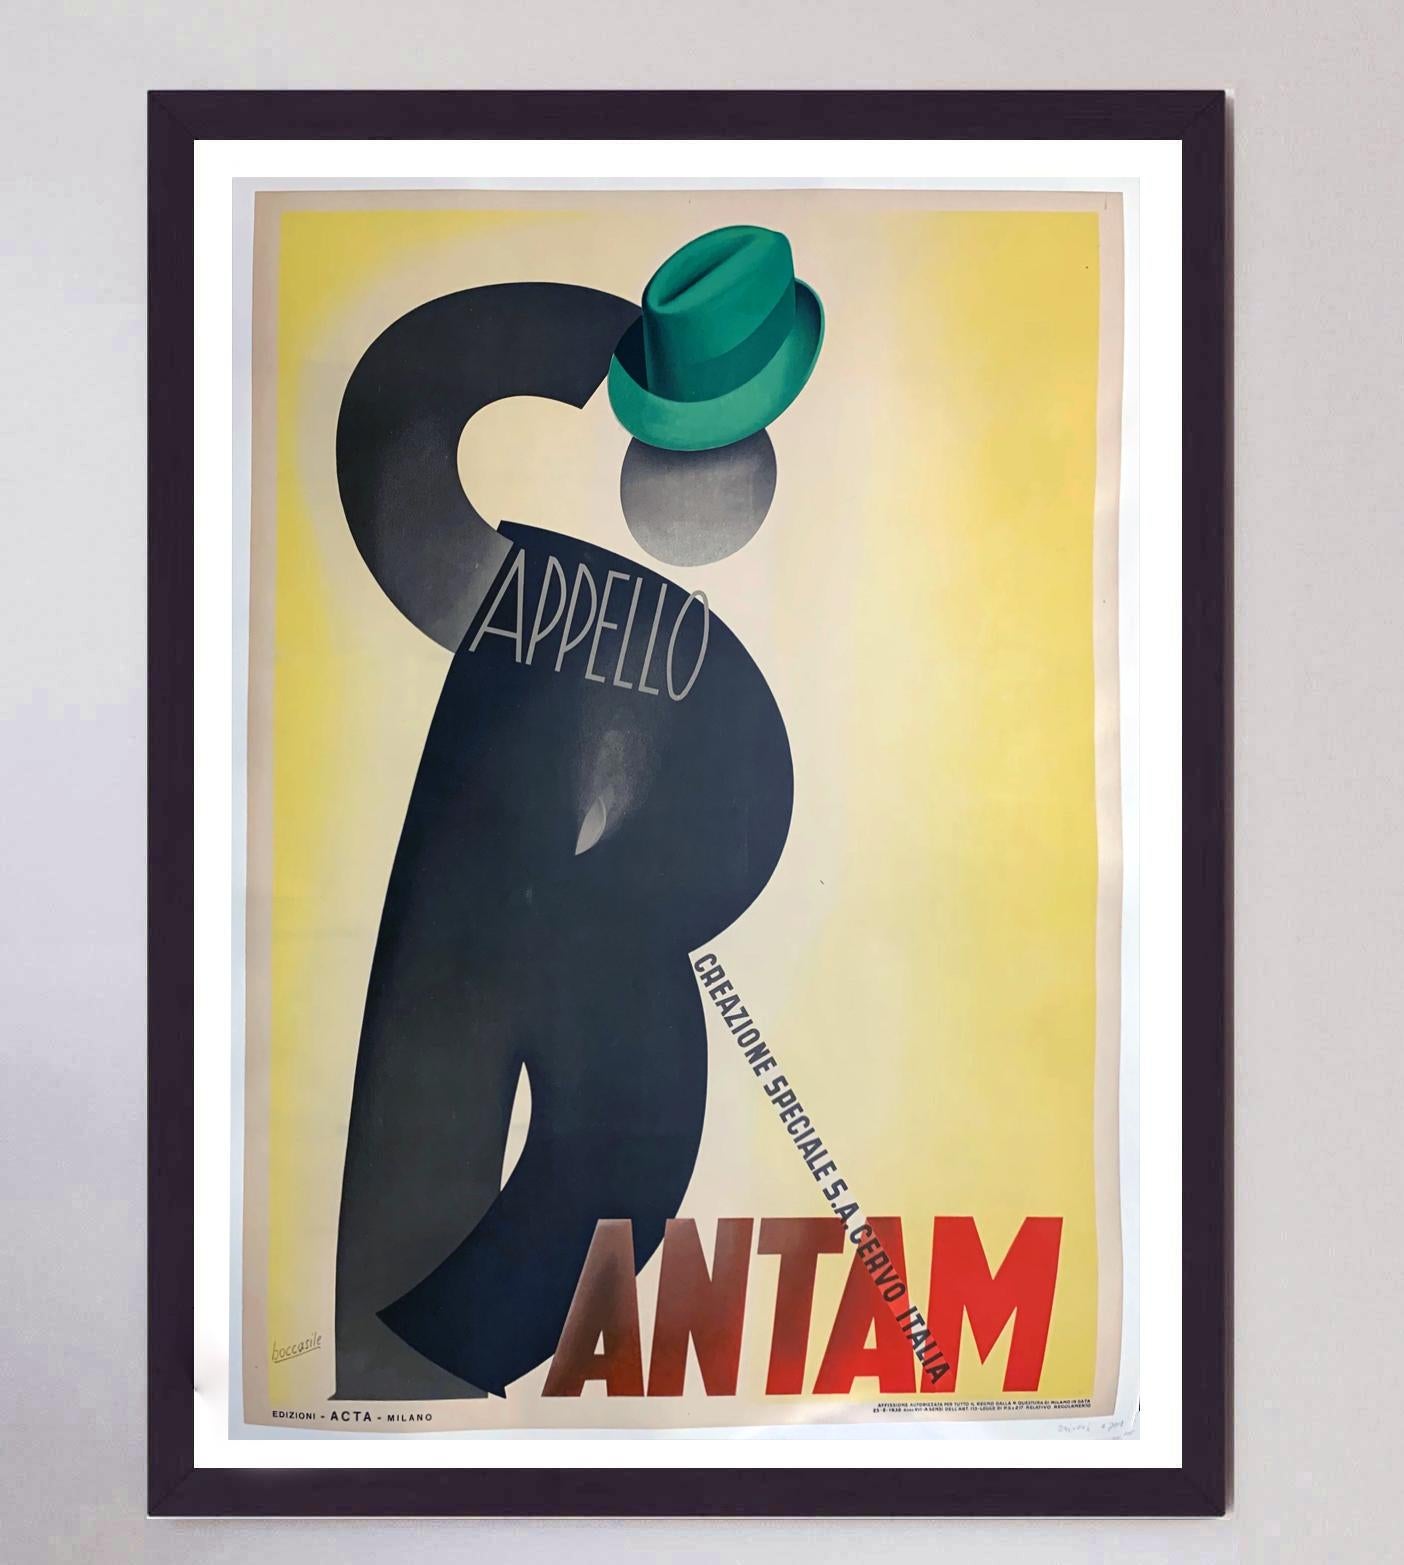 Stunning art deco poster designed by the iconic French-Italian poster artist Leonetto Cappiello created to promote Bantam Hats of Italy. The brand created fashion hats for men and this piece depicts a man with a green hat with a lined figure